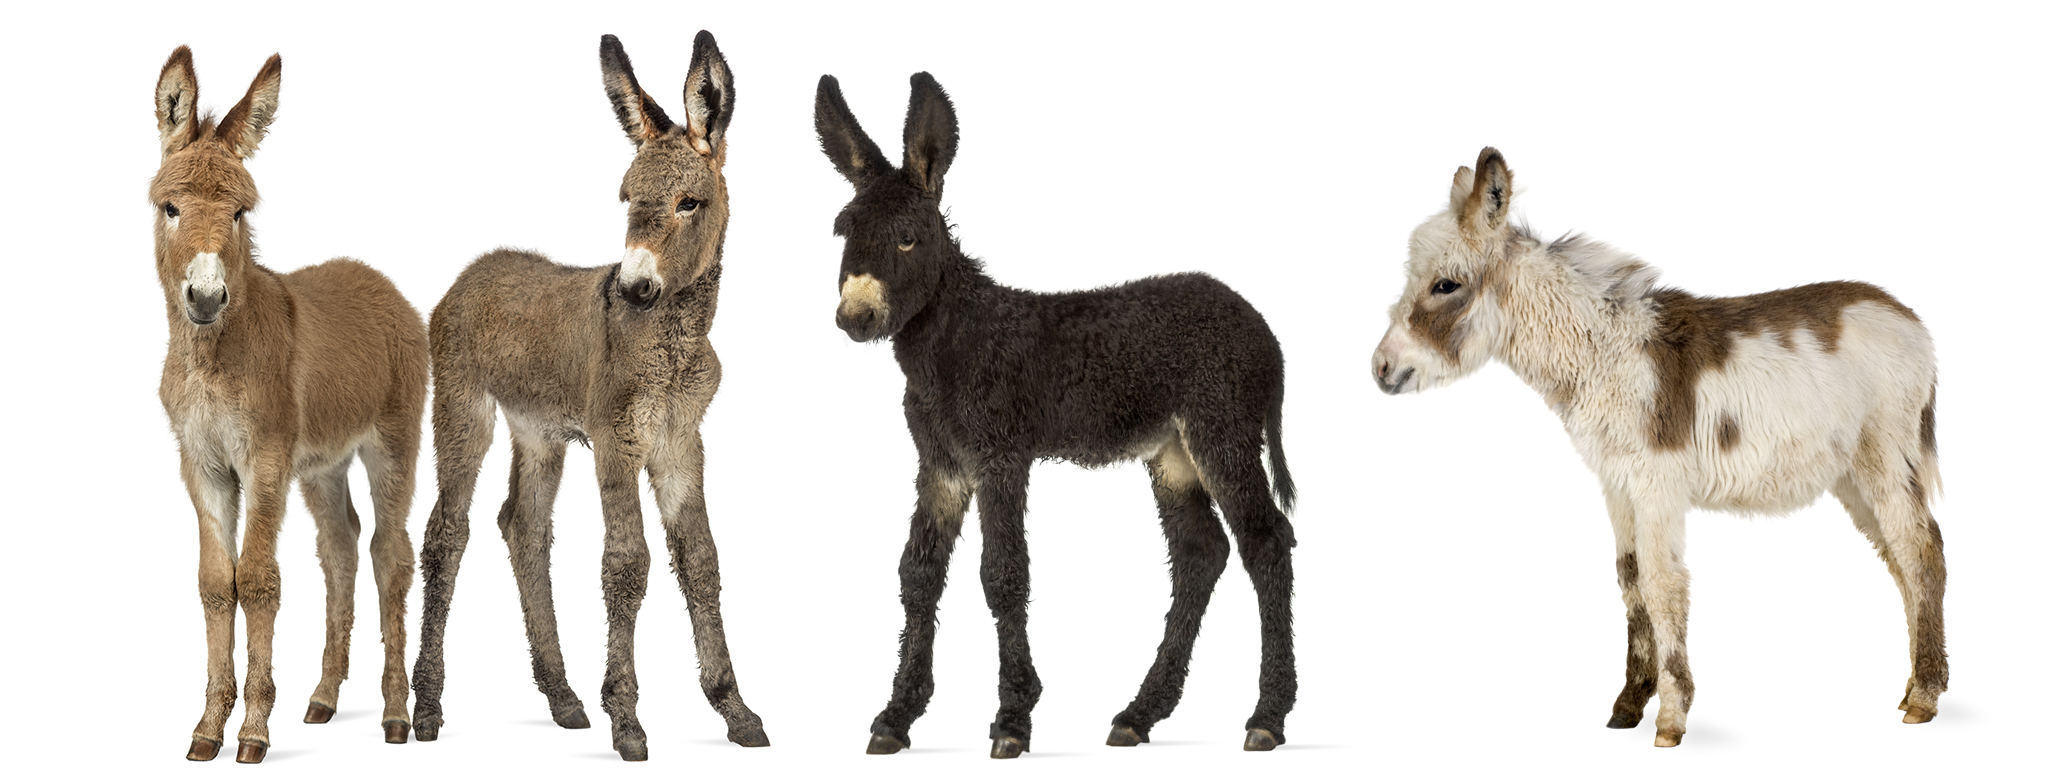 Donkeys with different coat colors and hair lengths